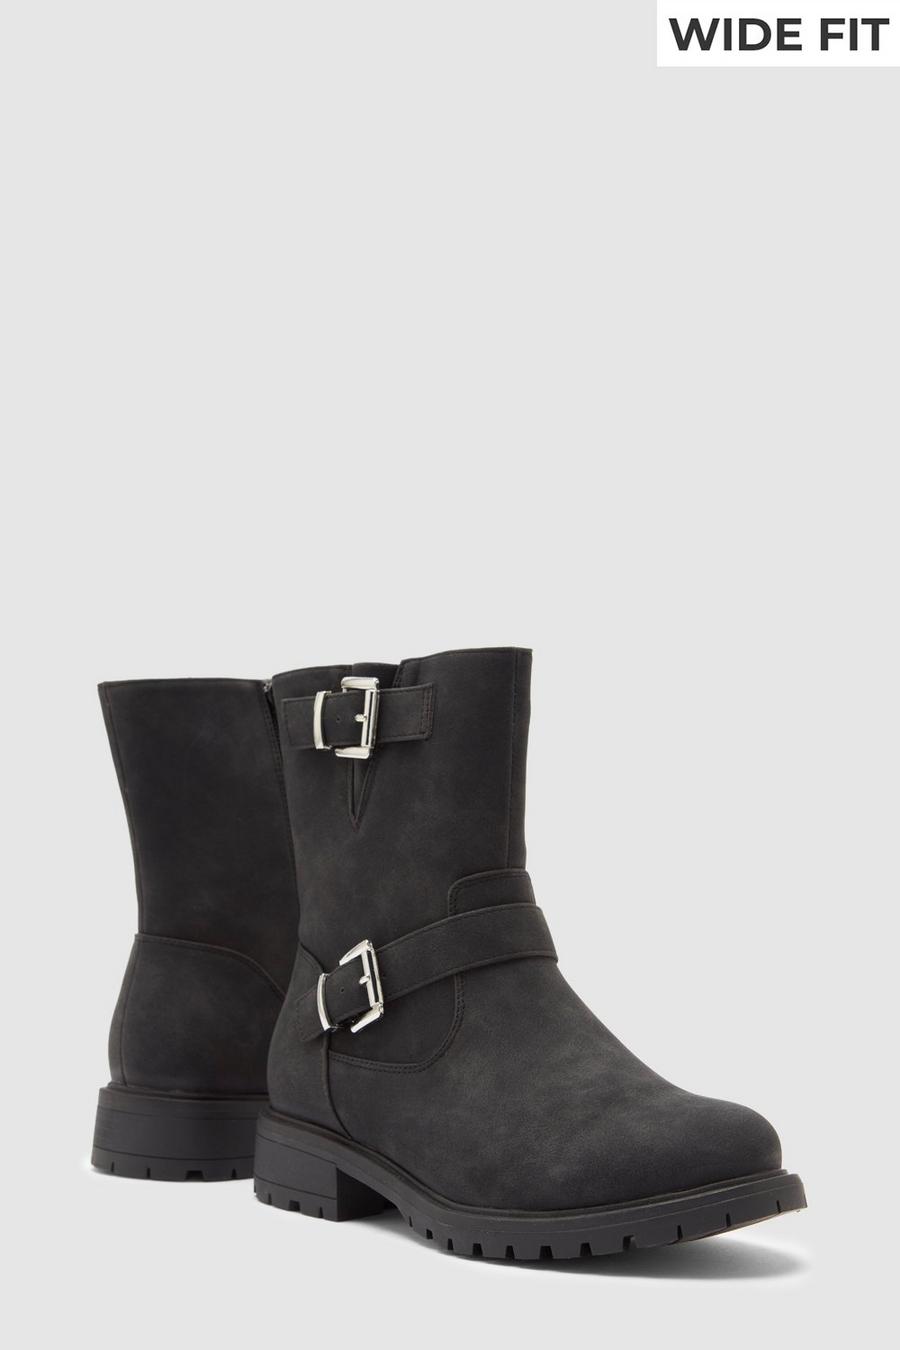 Good For The Sole: Monet Comfort Wide Fit Biker Boot